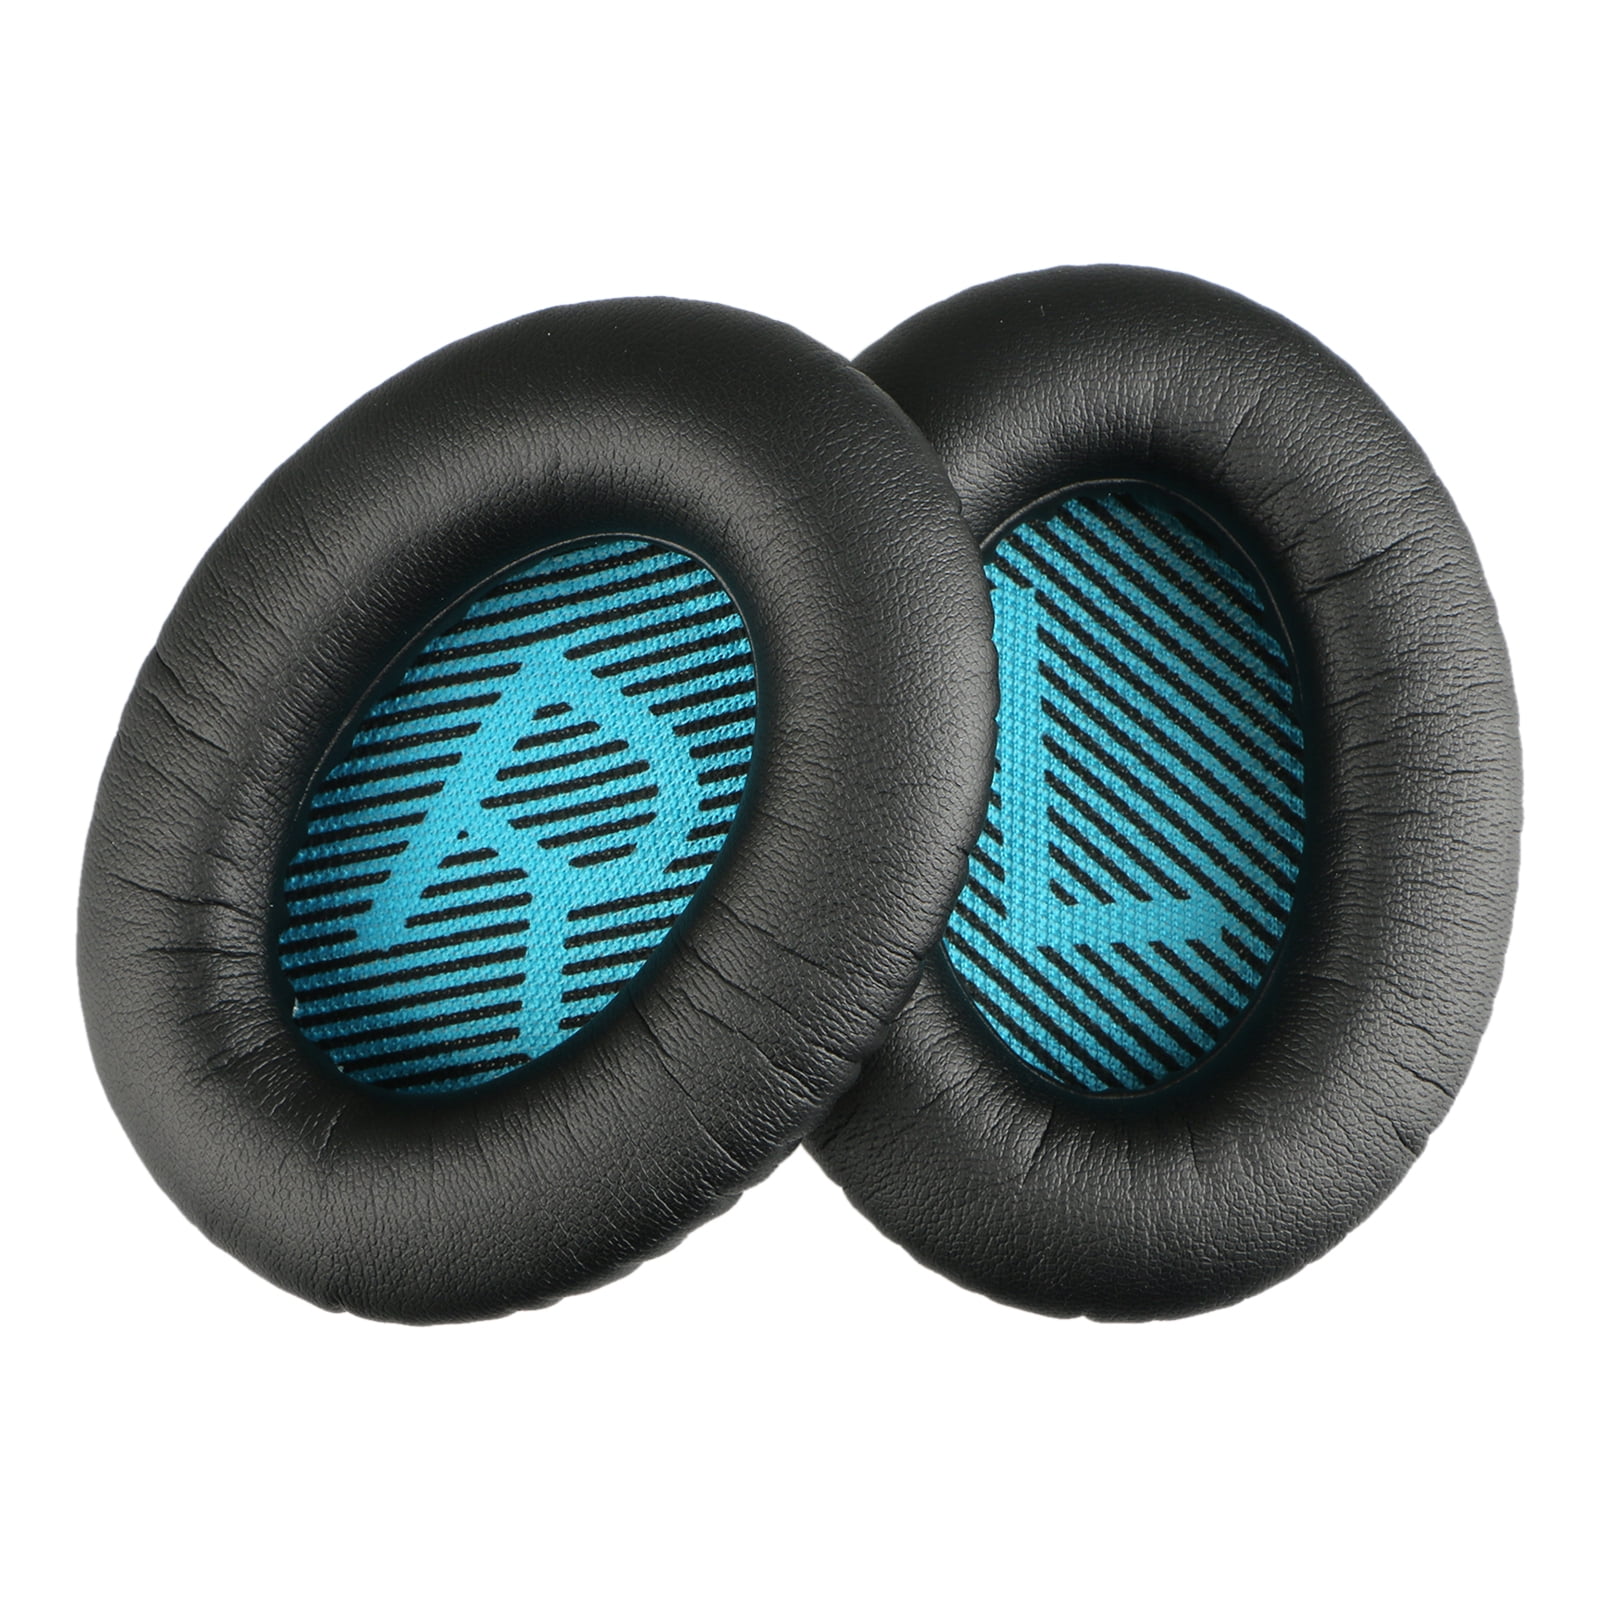 Pair of Replacement EarPads Ear Cushions for QuietComfort QC2 AE2 